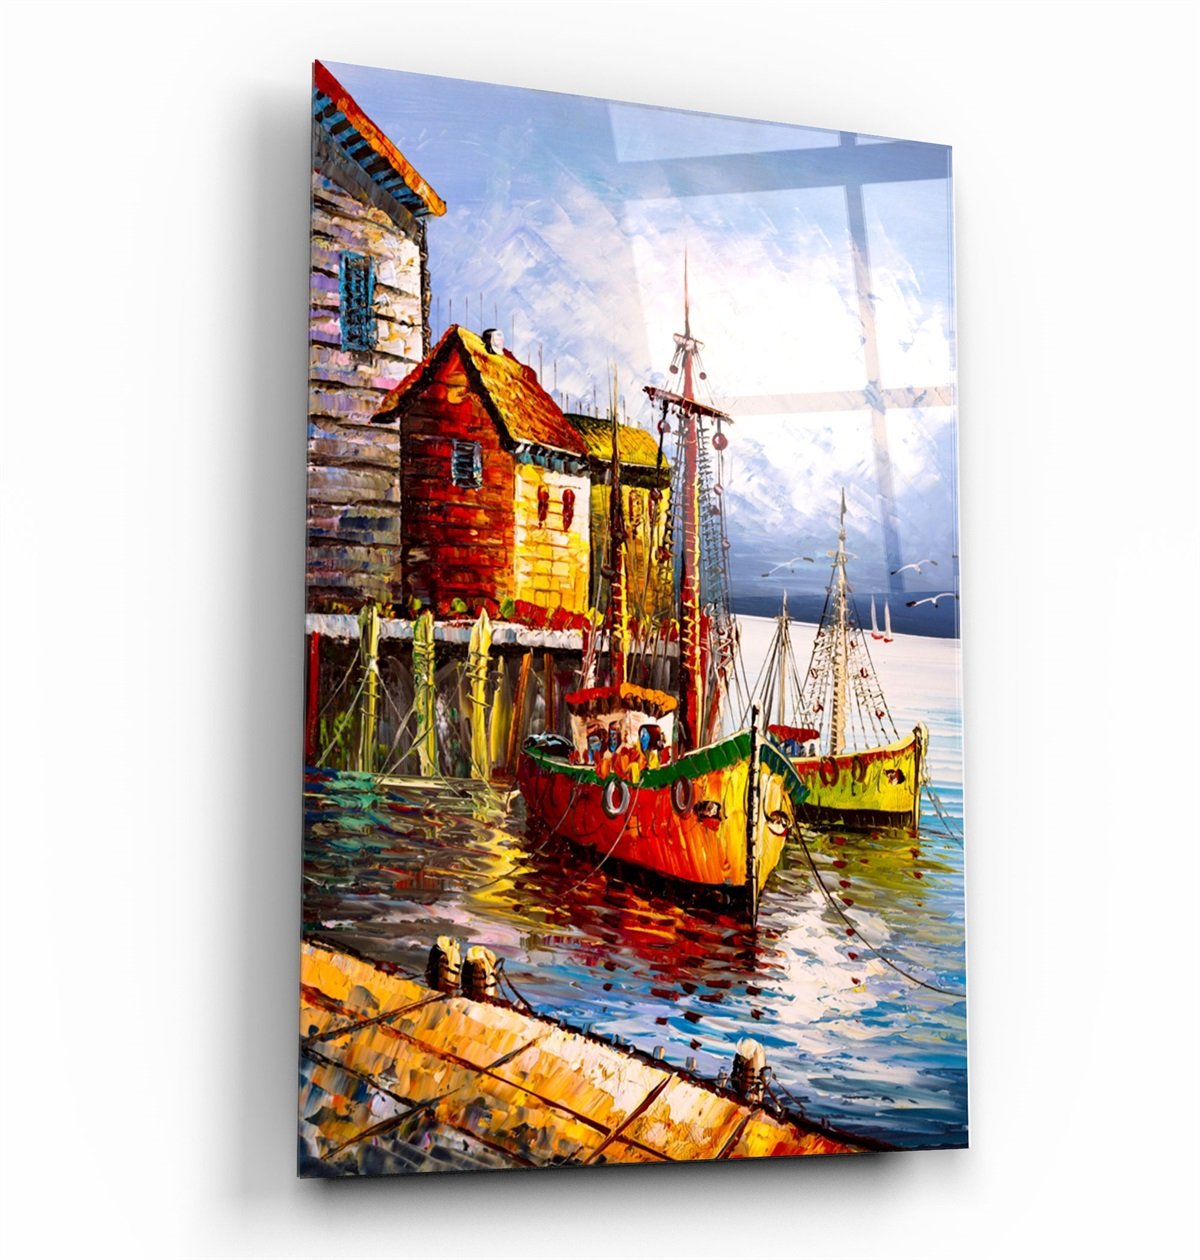 ・"Boats and Houses"・Glass Wall Art